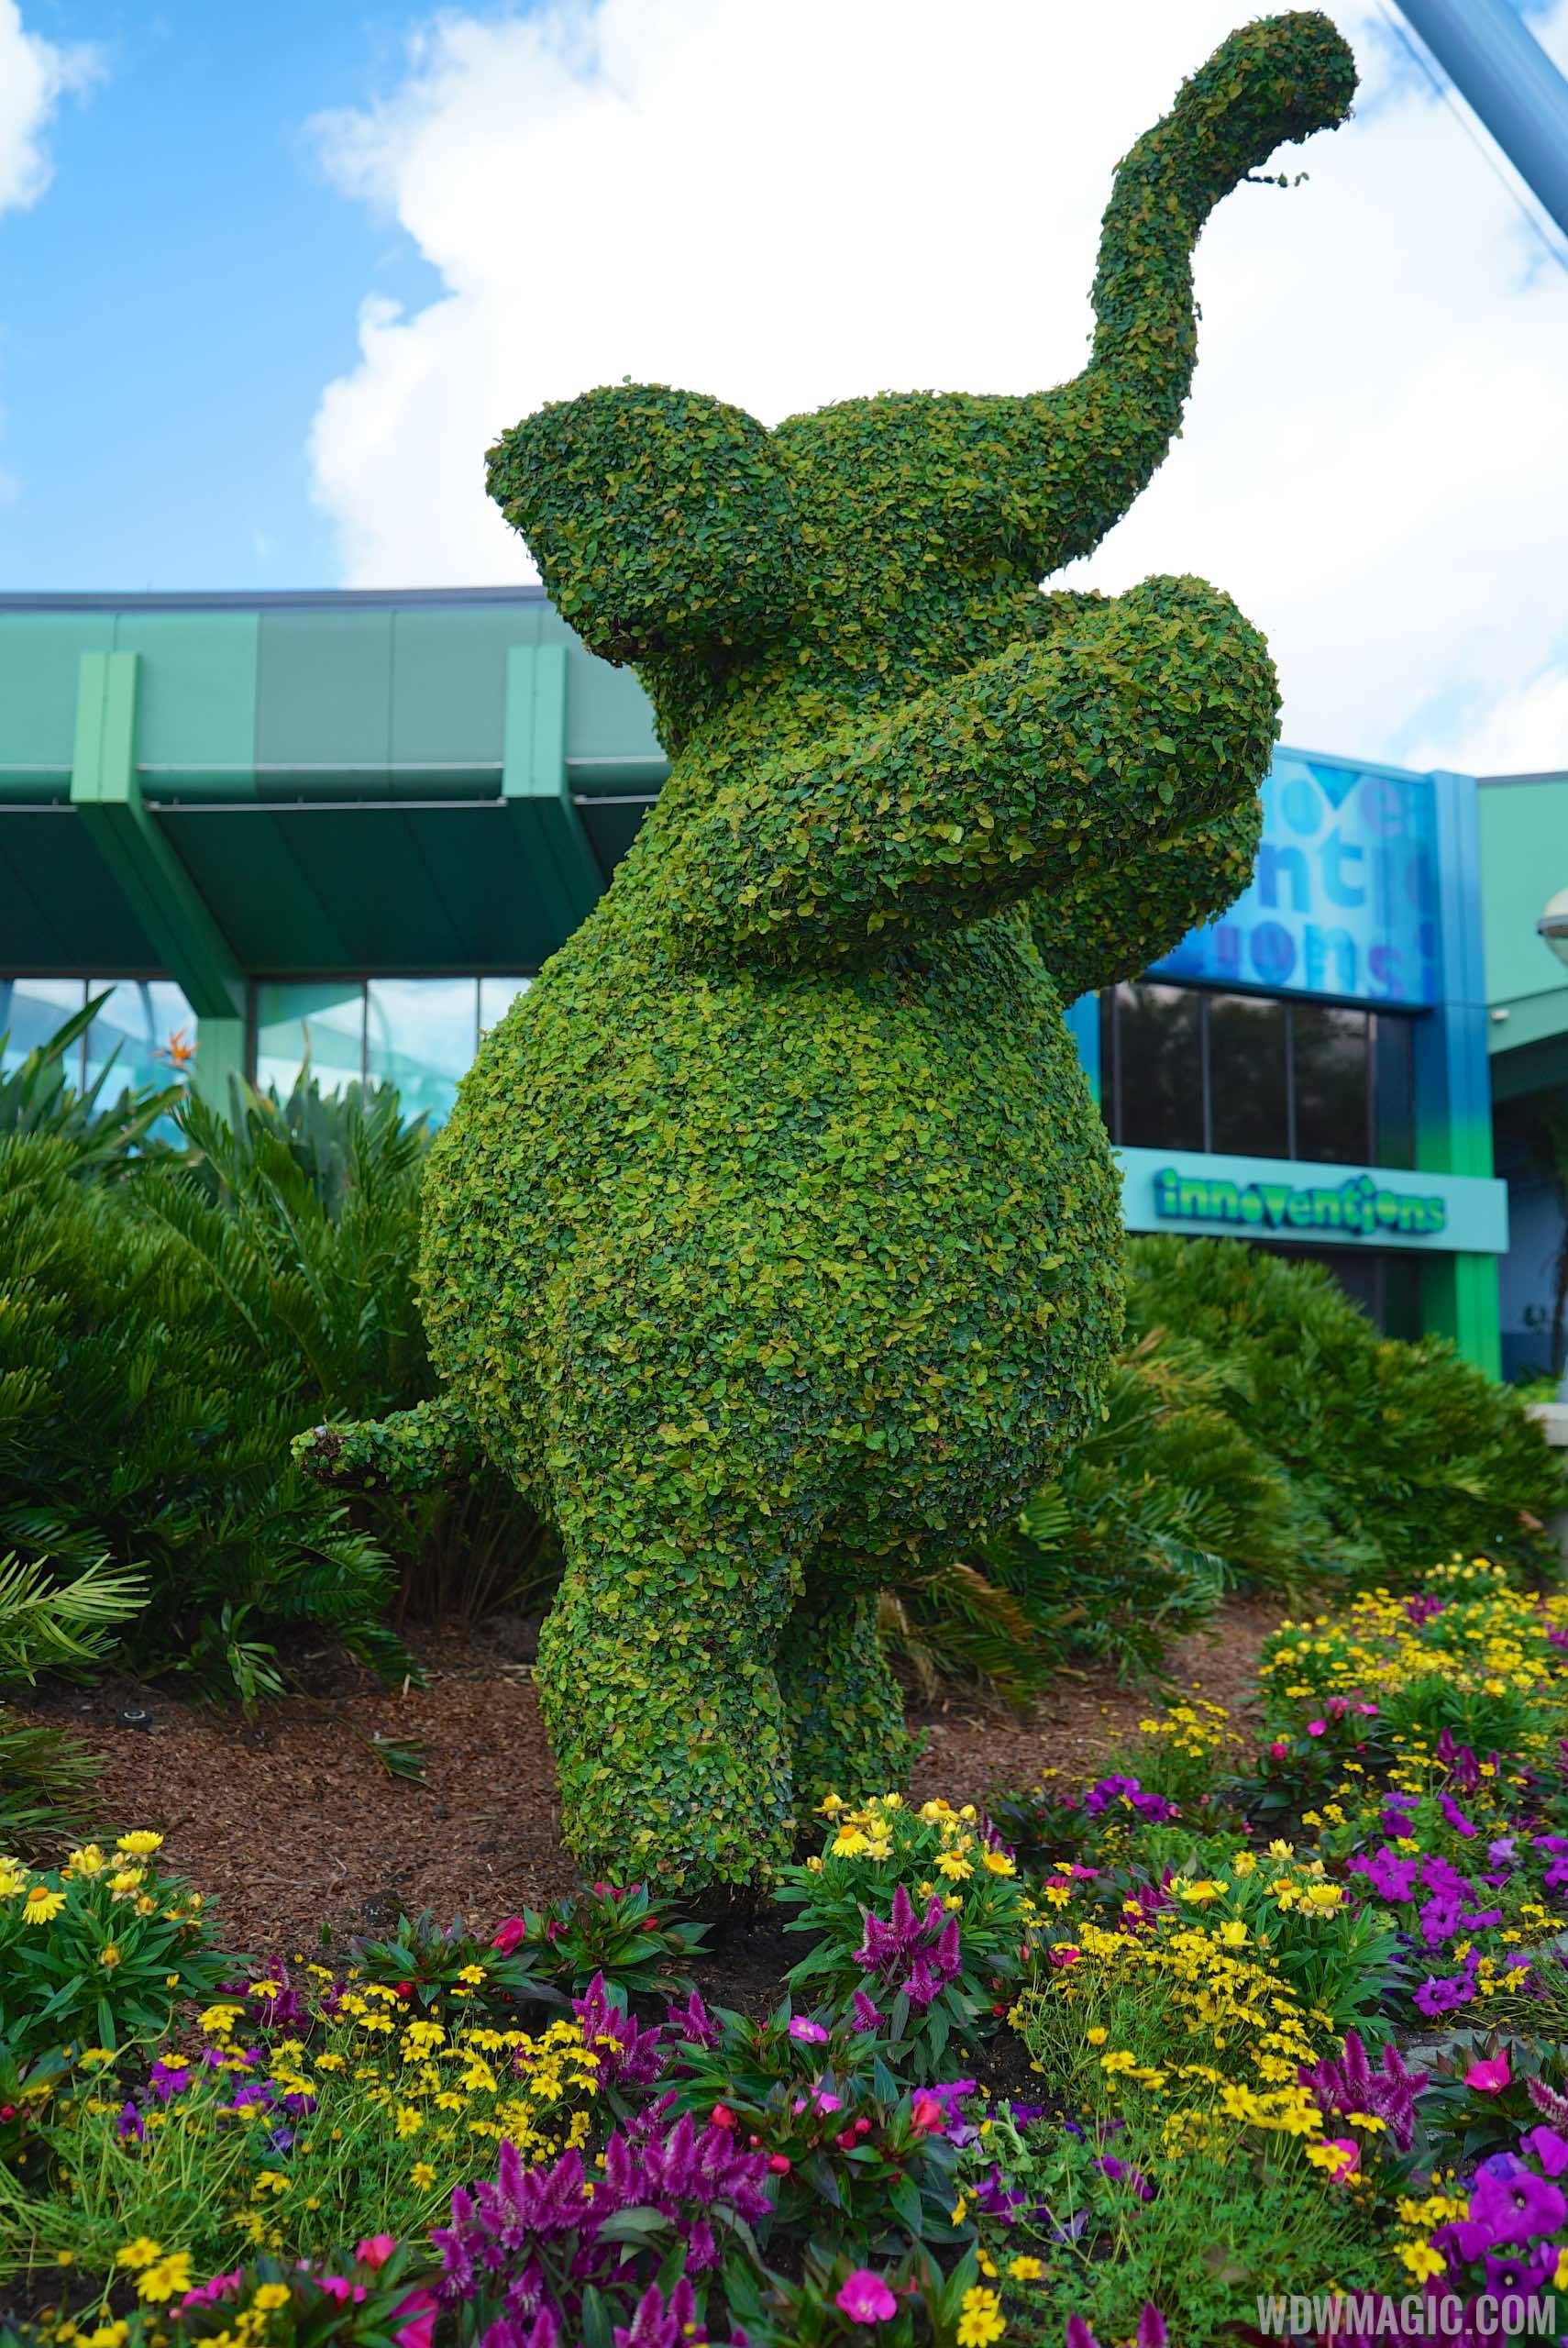 2015 Epcot Flower and Garden Festival - Elephant topiary